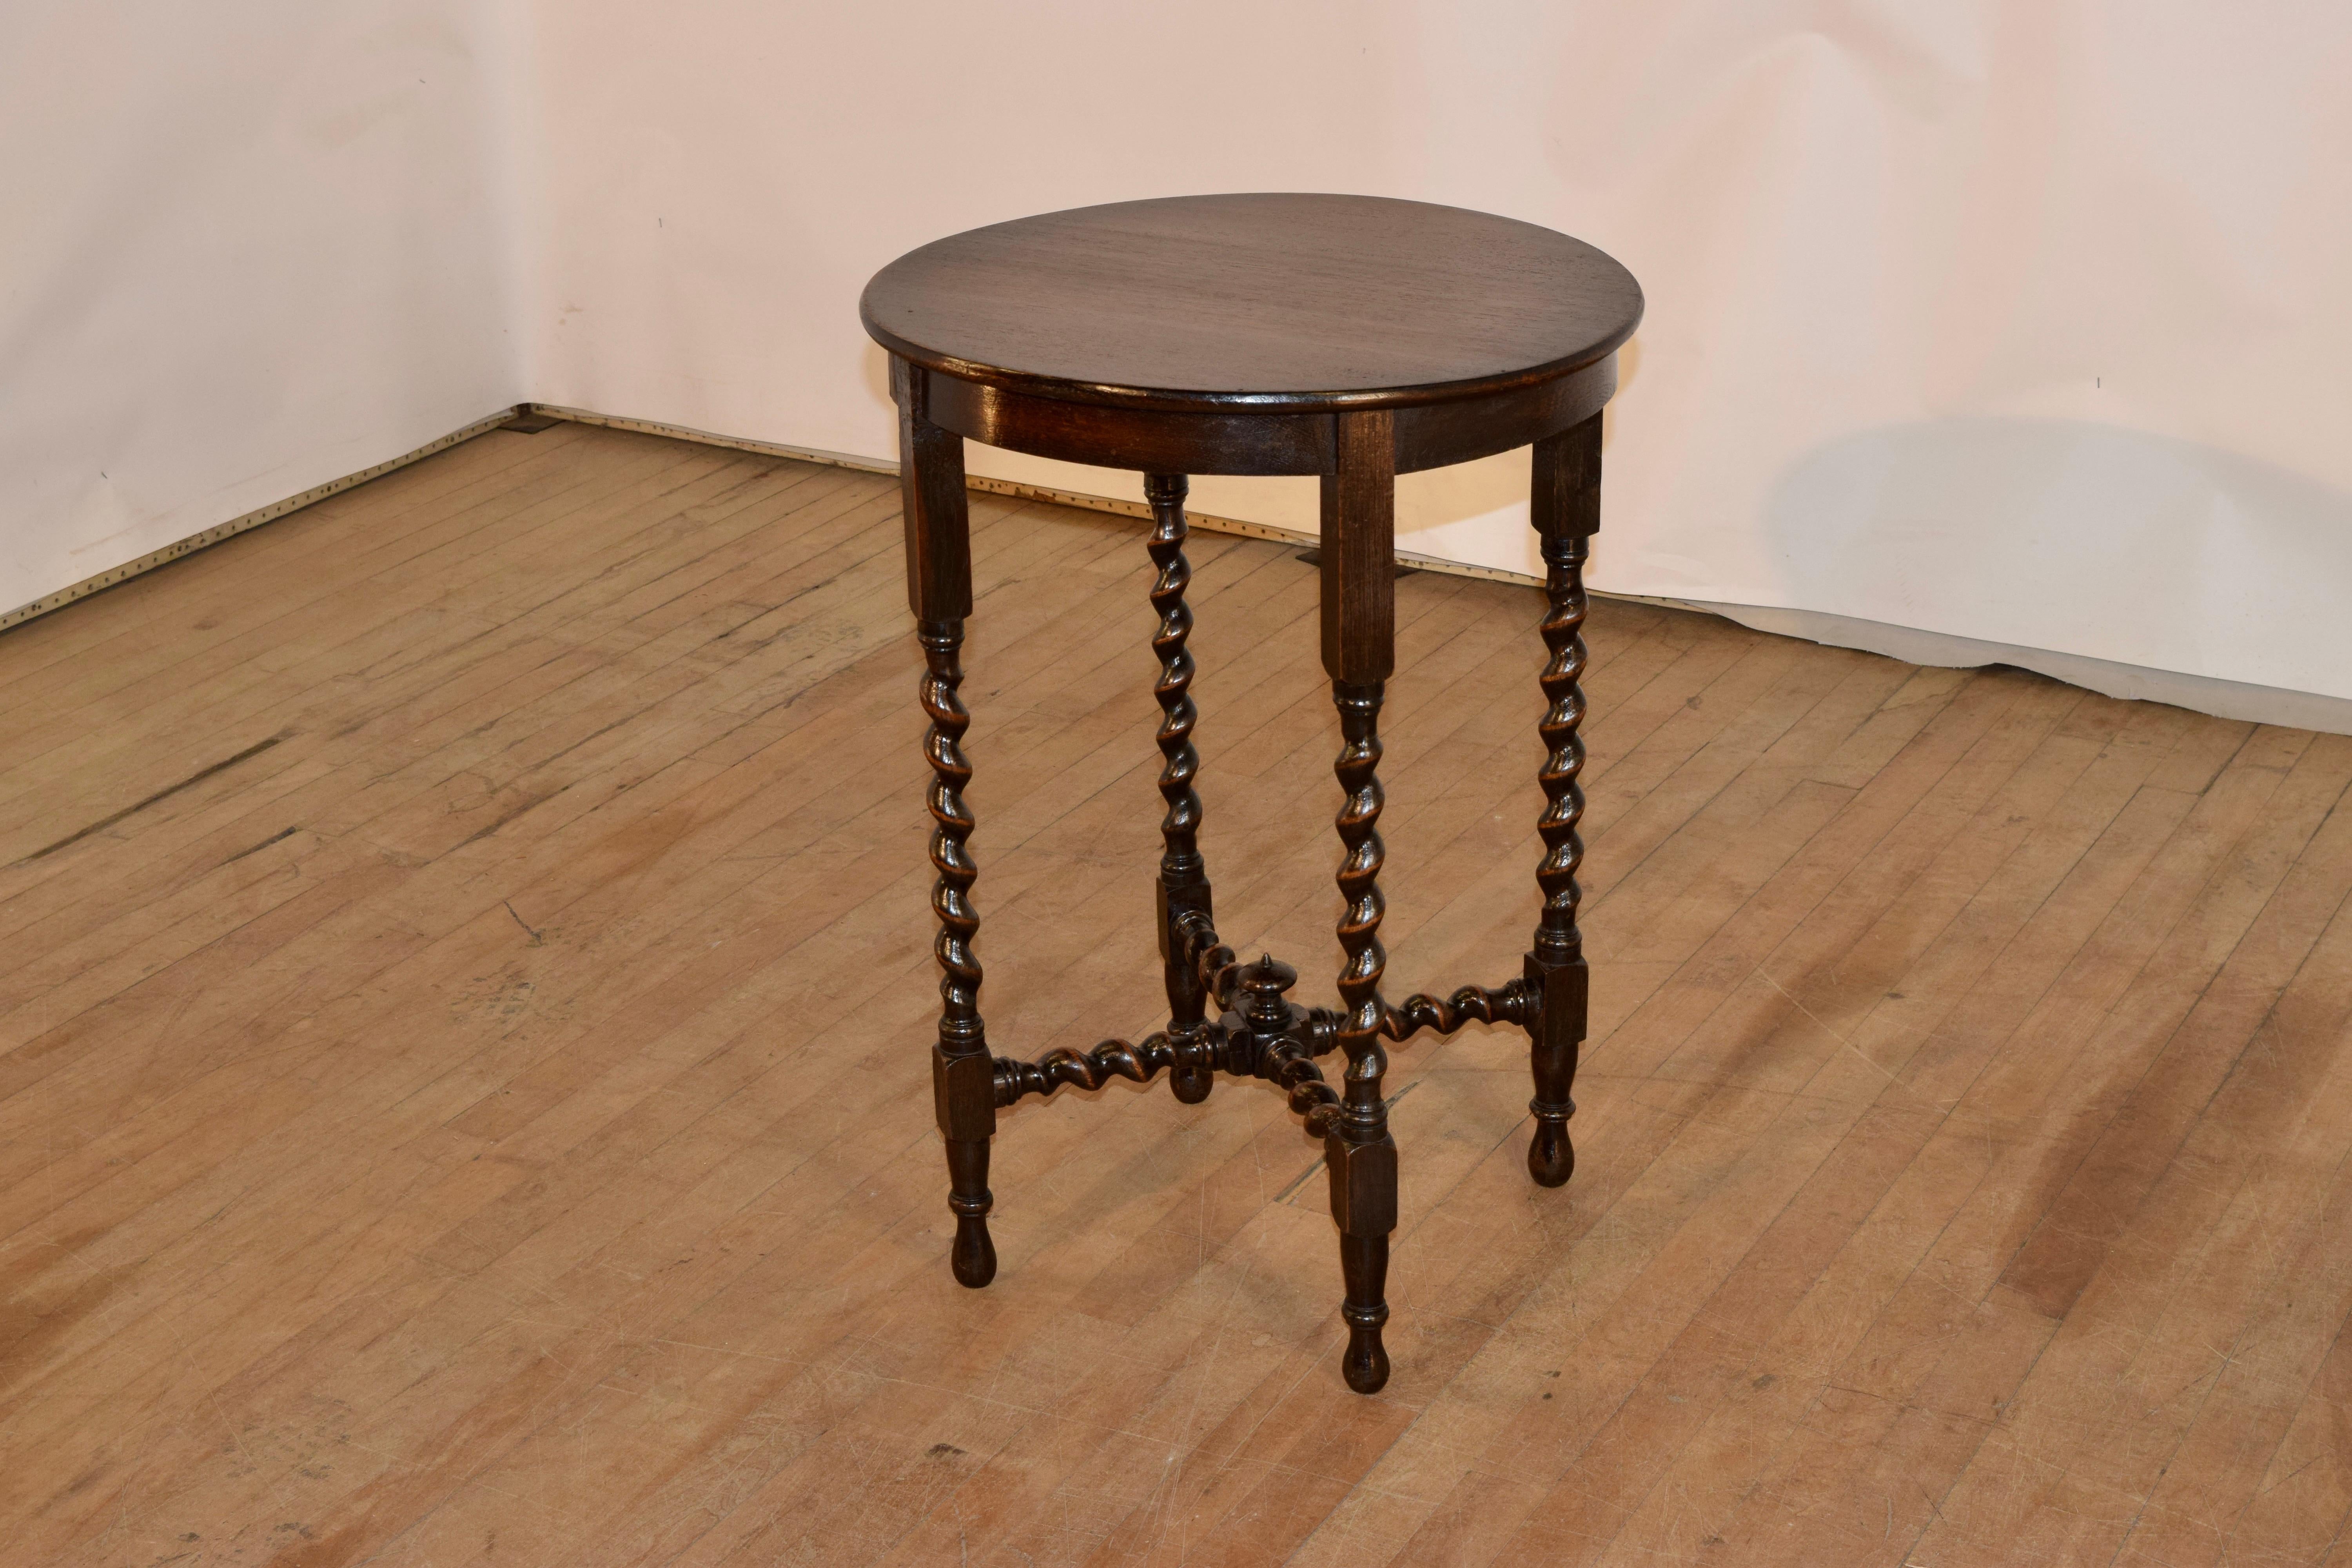 Early 20th Century English Side Table, c. 1900